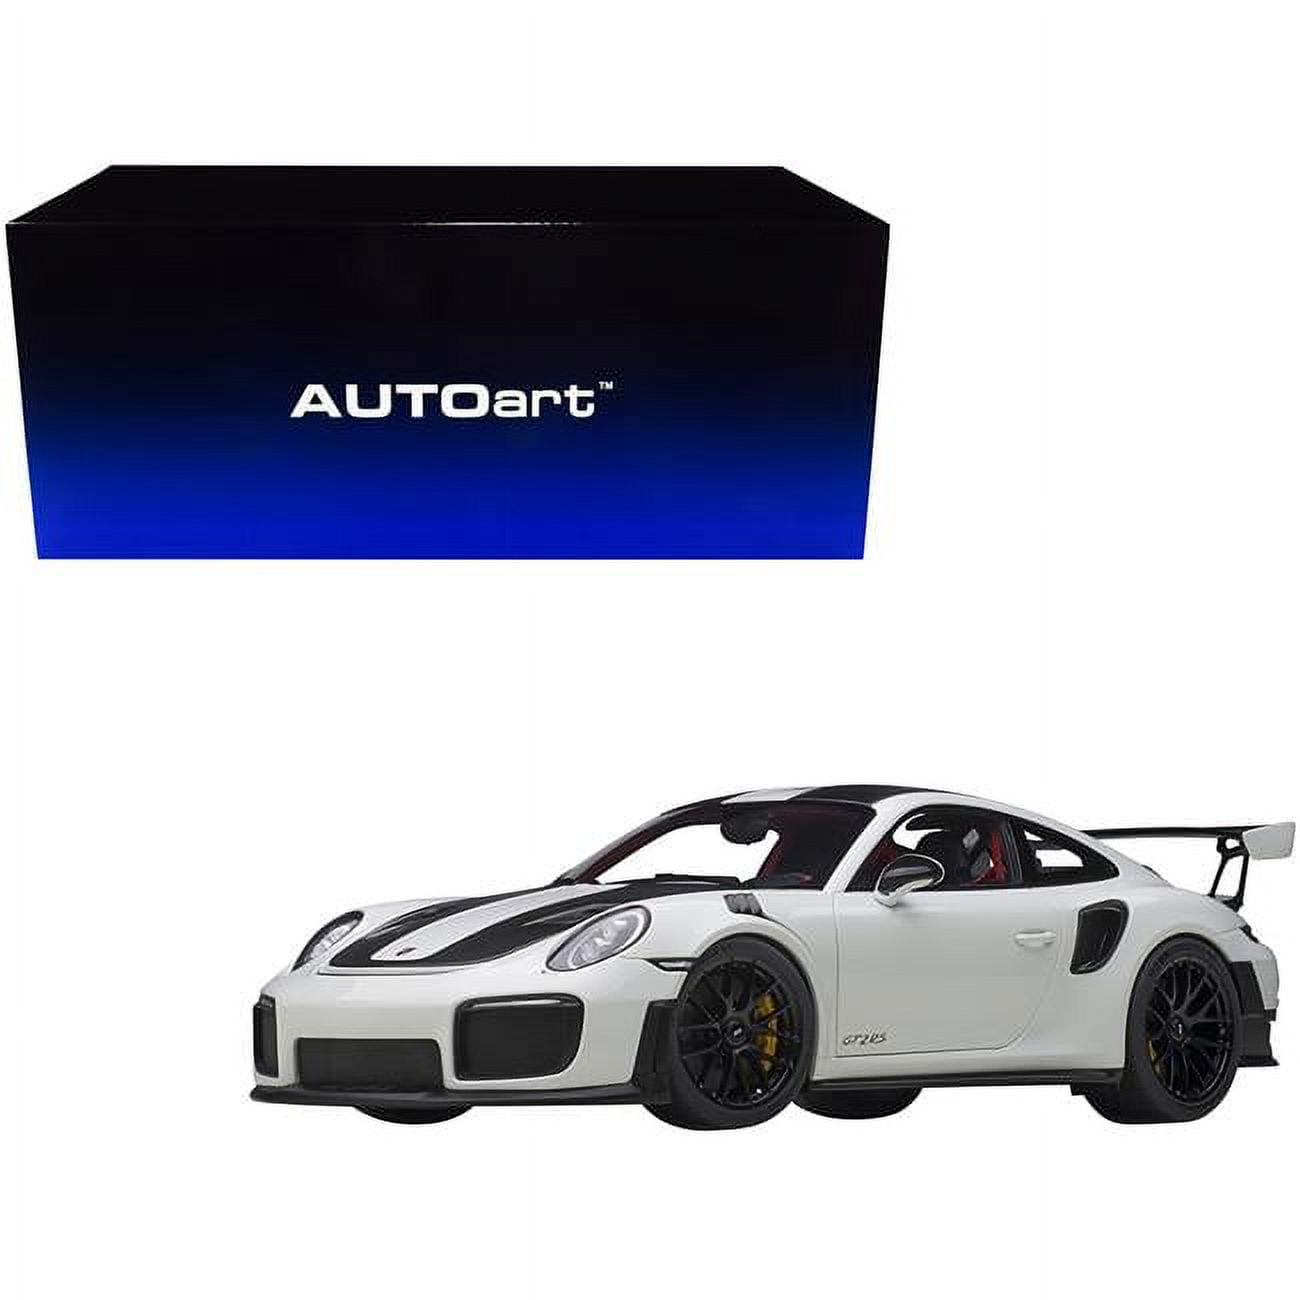 Picture of Autoart 78171 Porsche 911 991.2 GT2 RS Weissach Pack with Carbon Stripes 1-18 Scale Model Car, White